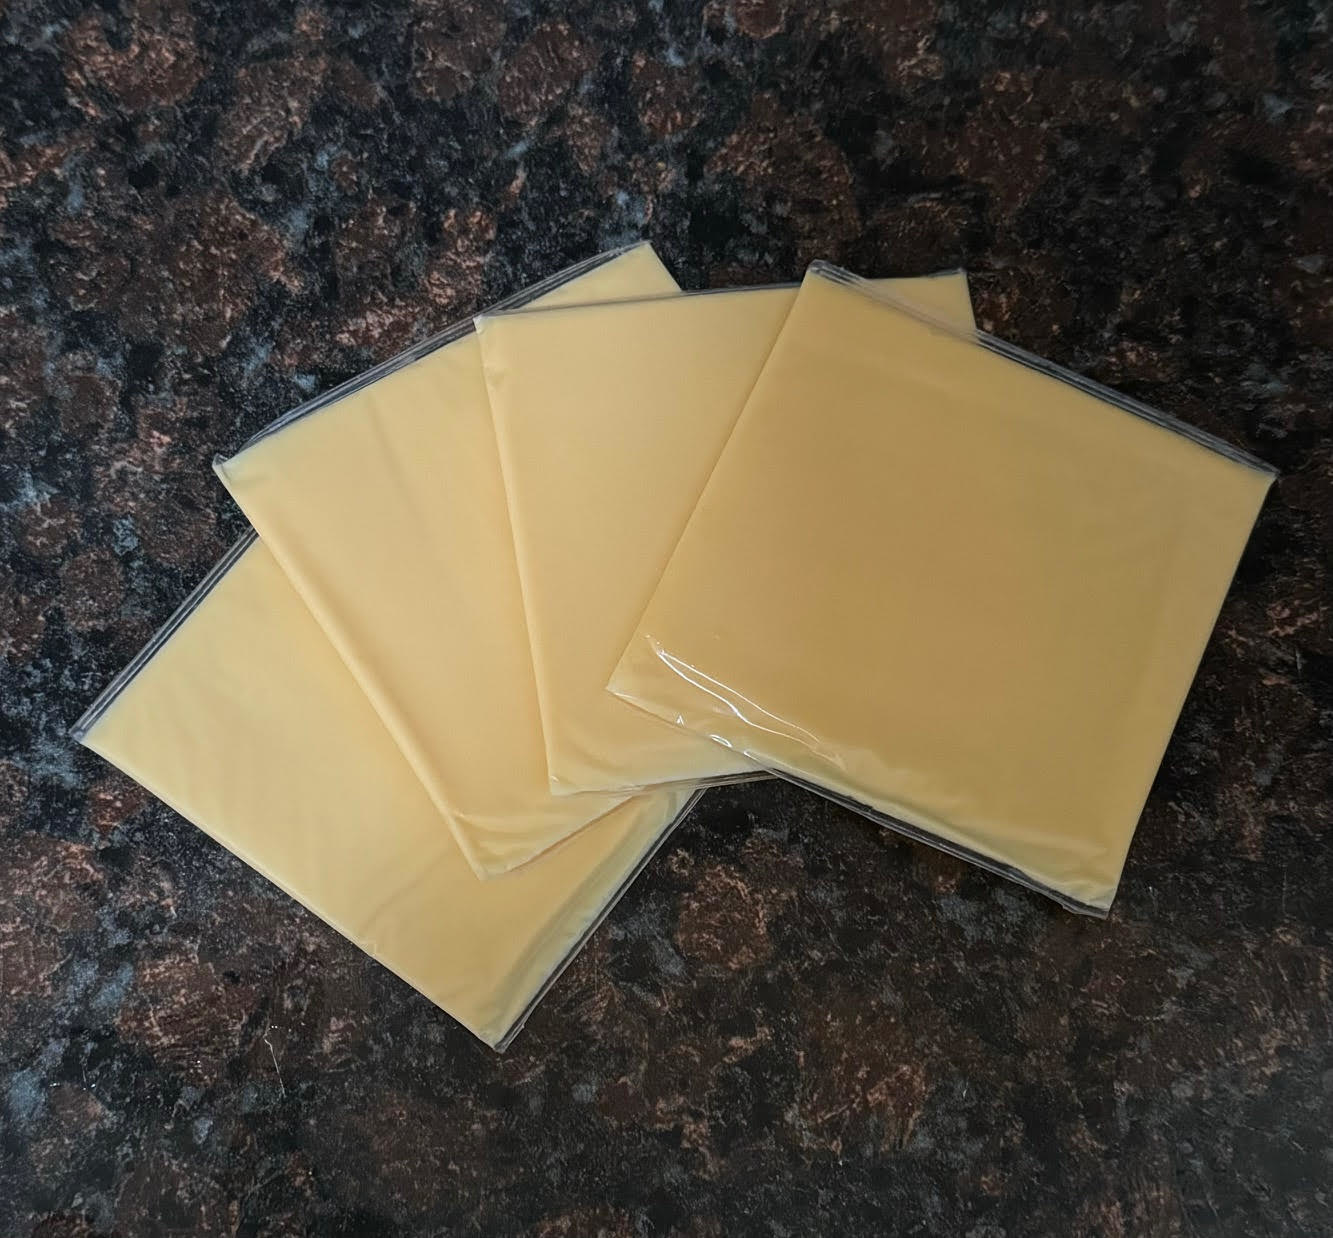 Three slices of processed cheese in plastic wrappers on a countertop